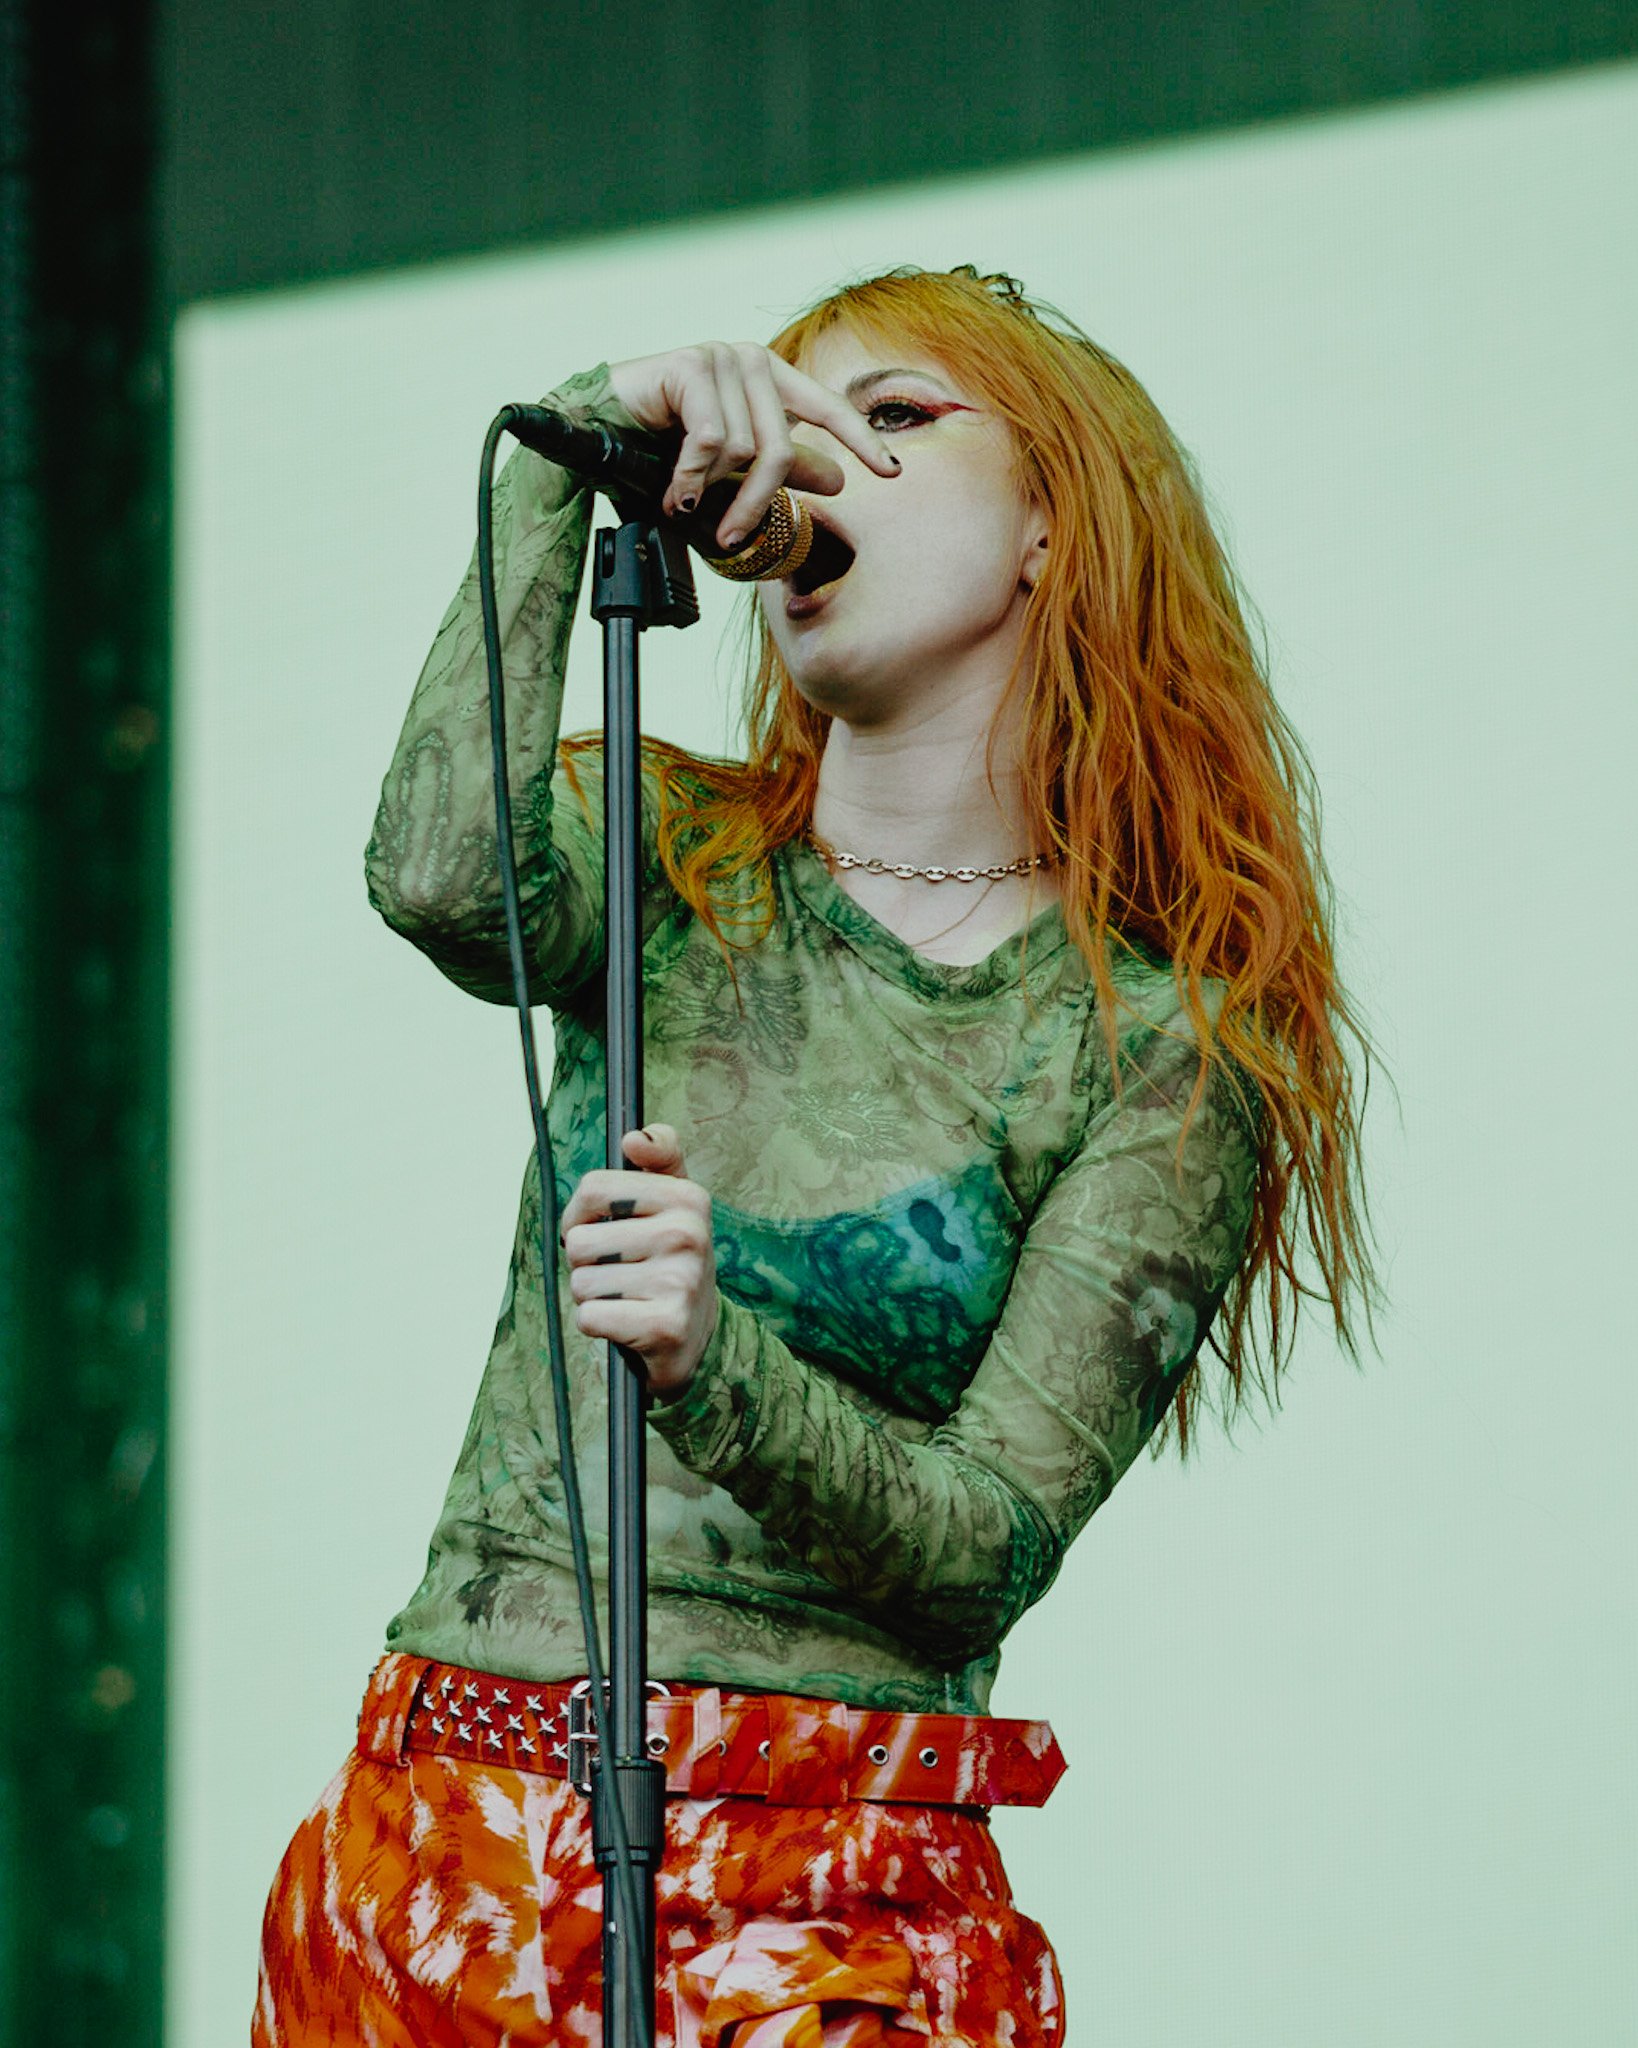  Iconic pop-punk band Paramore opens up its set with hits “Brick by Boring Brick” and “Hard Times.” 